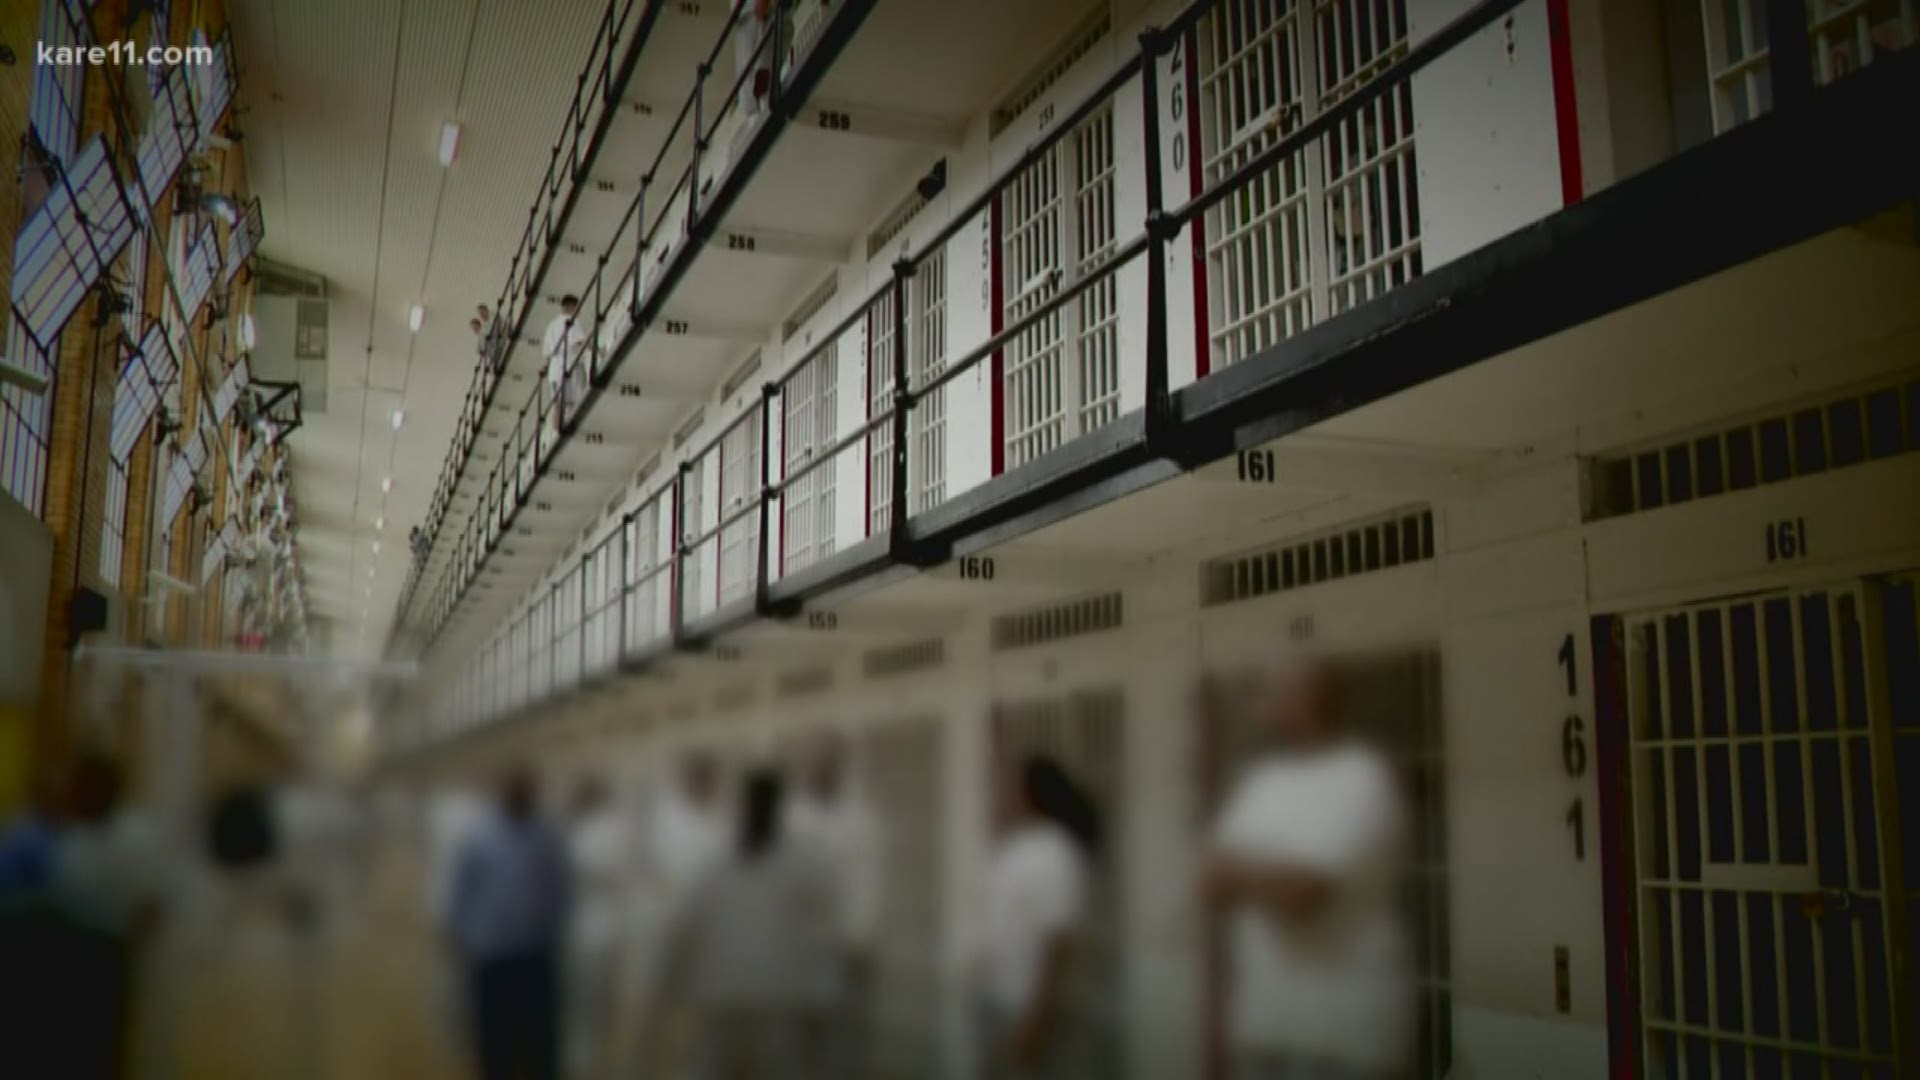 The Stillwater prison houses more than 1,500 prisoners, but inmates say they're still gathering in groups of up to 600.